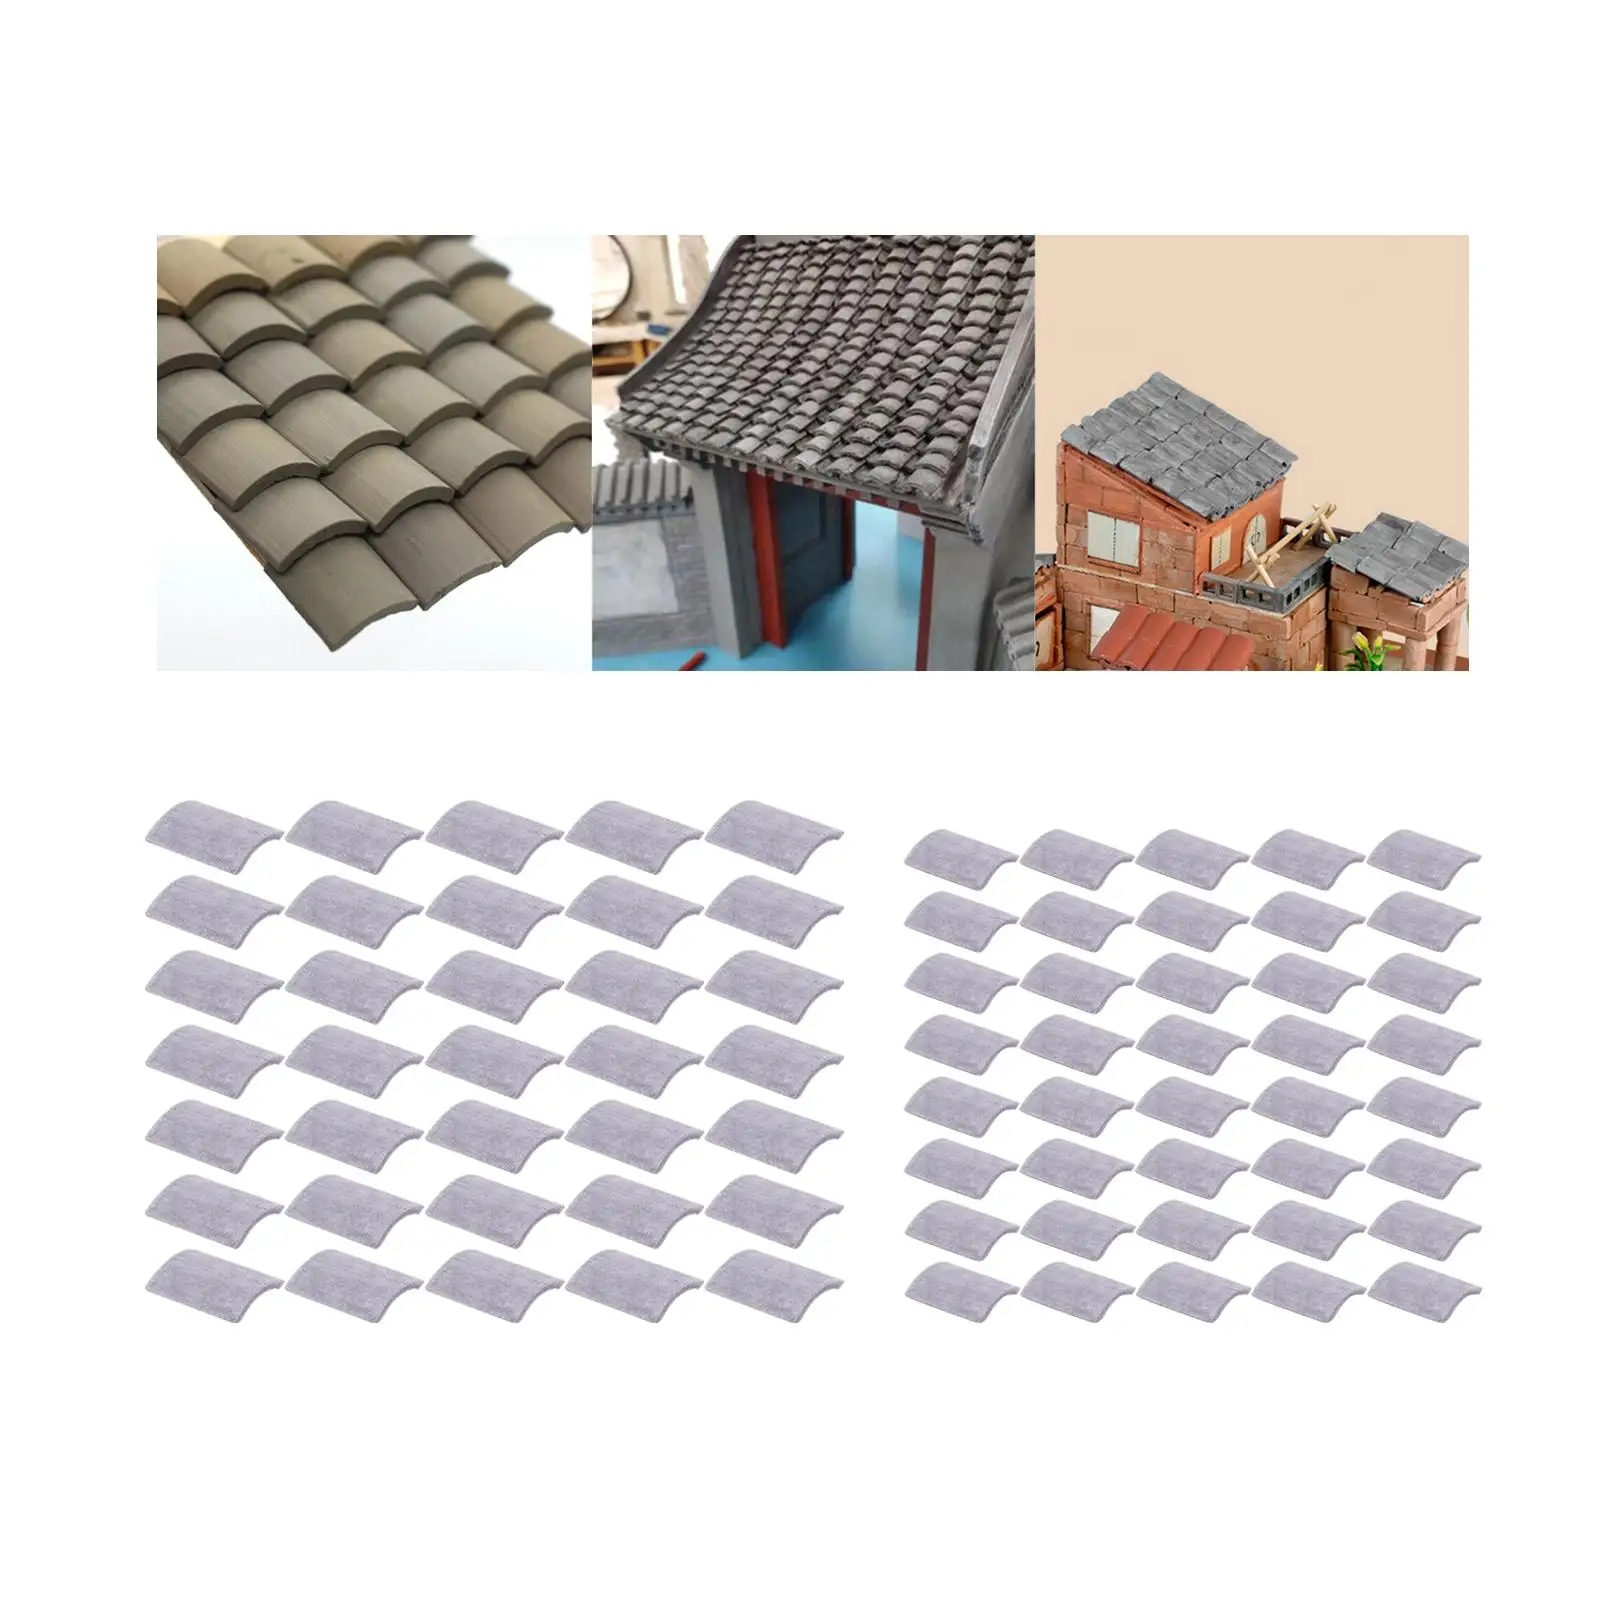 Grey Roof Tiles Decor 1:16 Miniature Tiles Figurine Landscaping Accessories Grey Wall Bricks for Dollhouses Living Room Toys